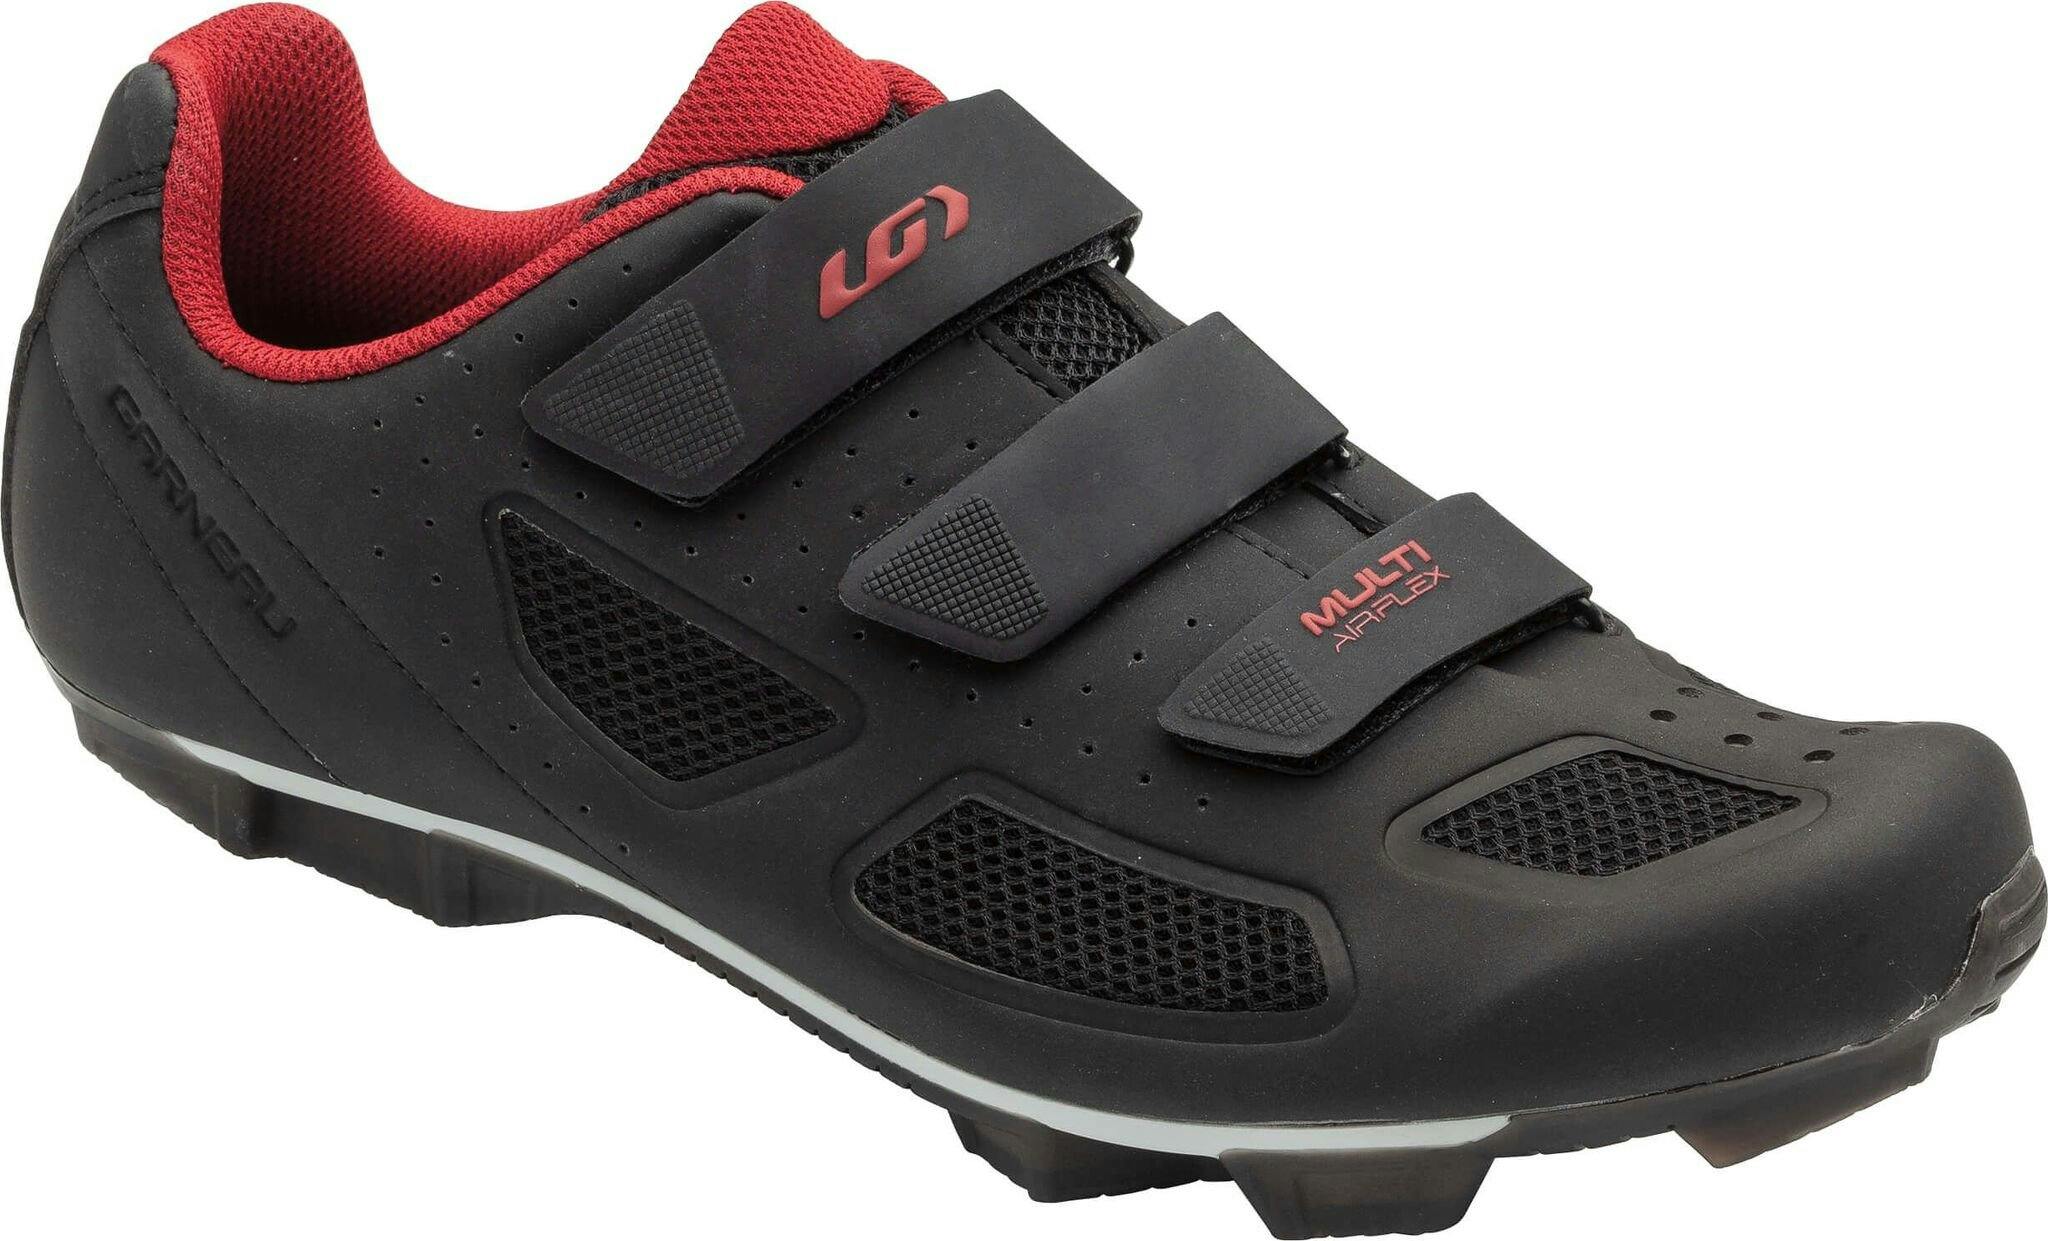 Product image for Multi Air Flex II Cycling Shoes - Men's